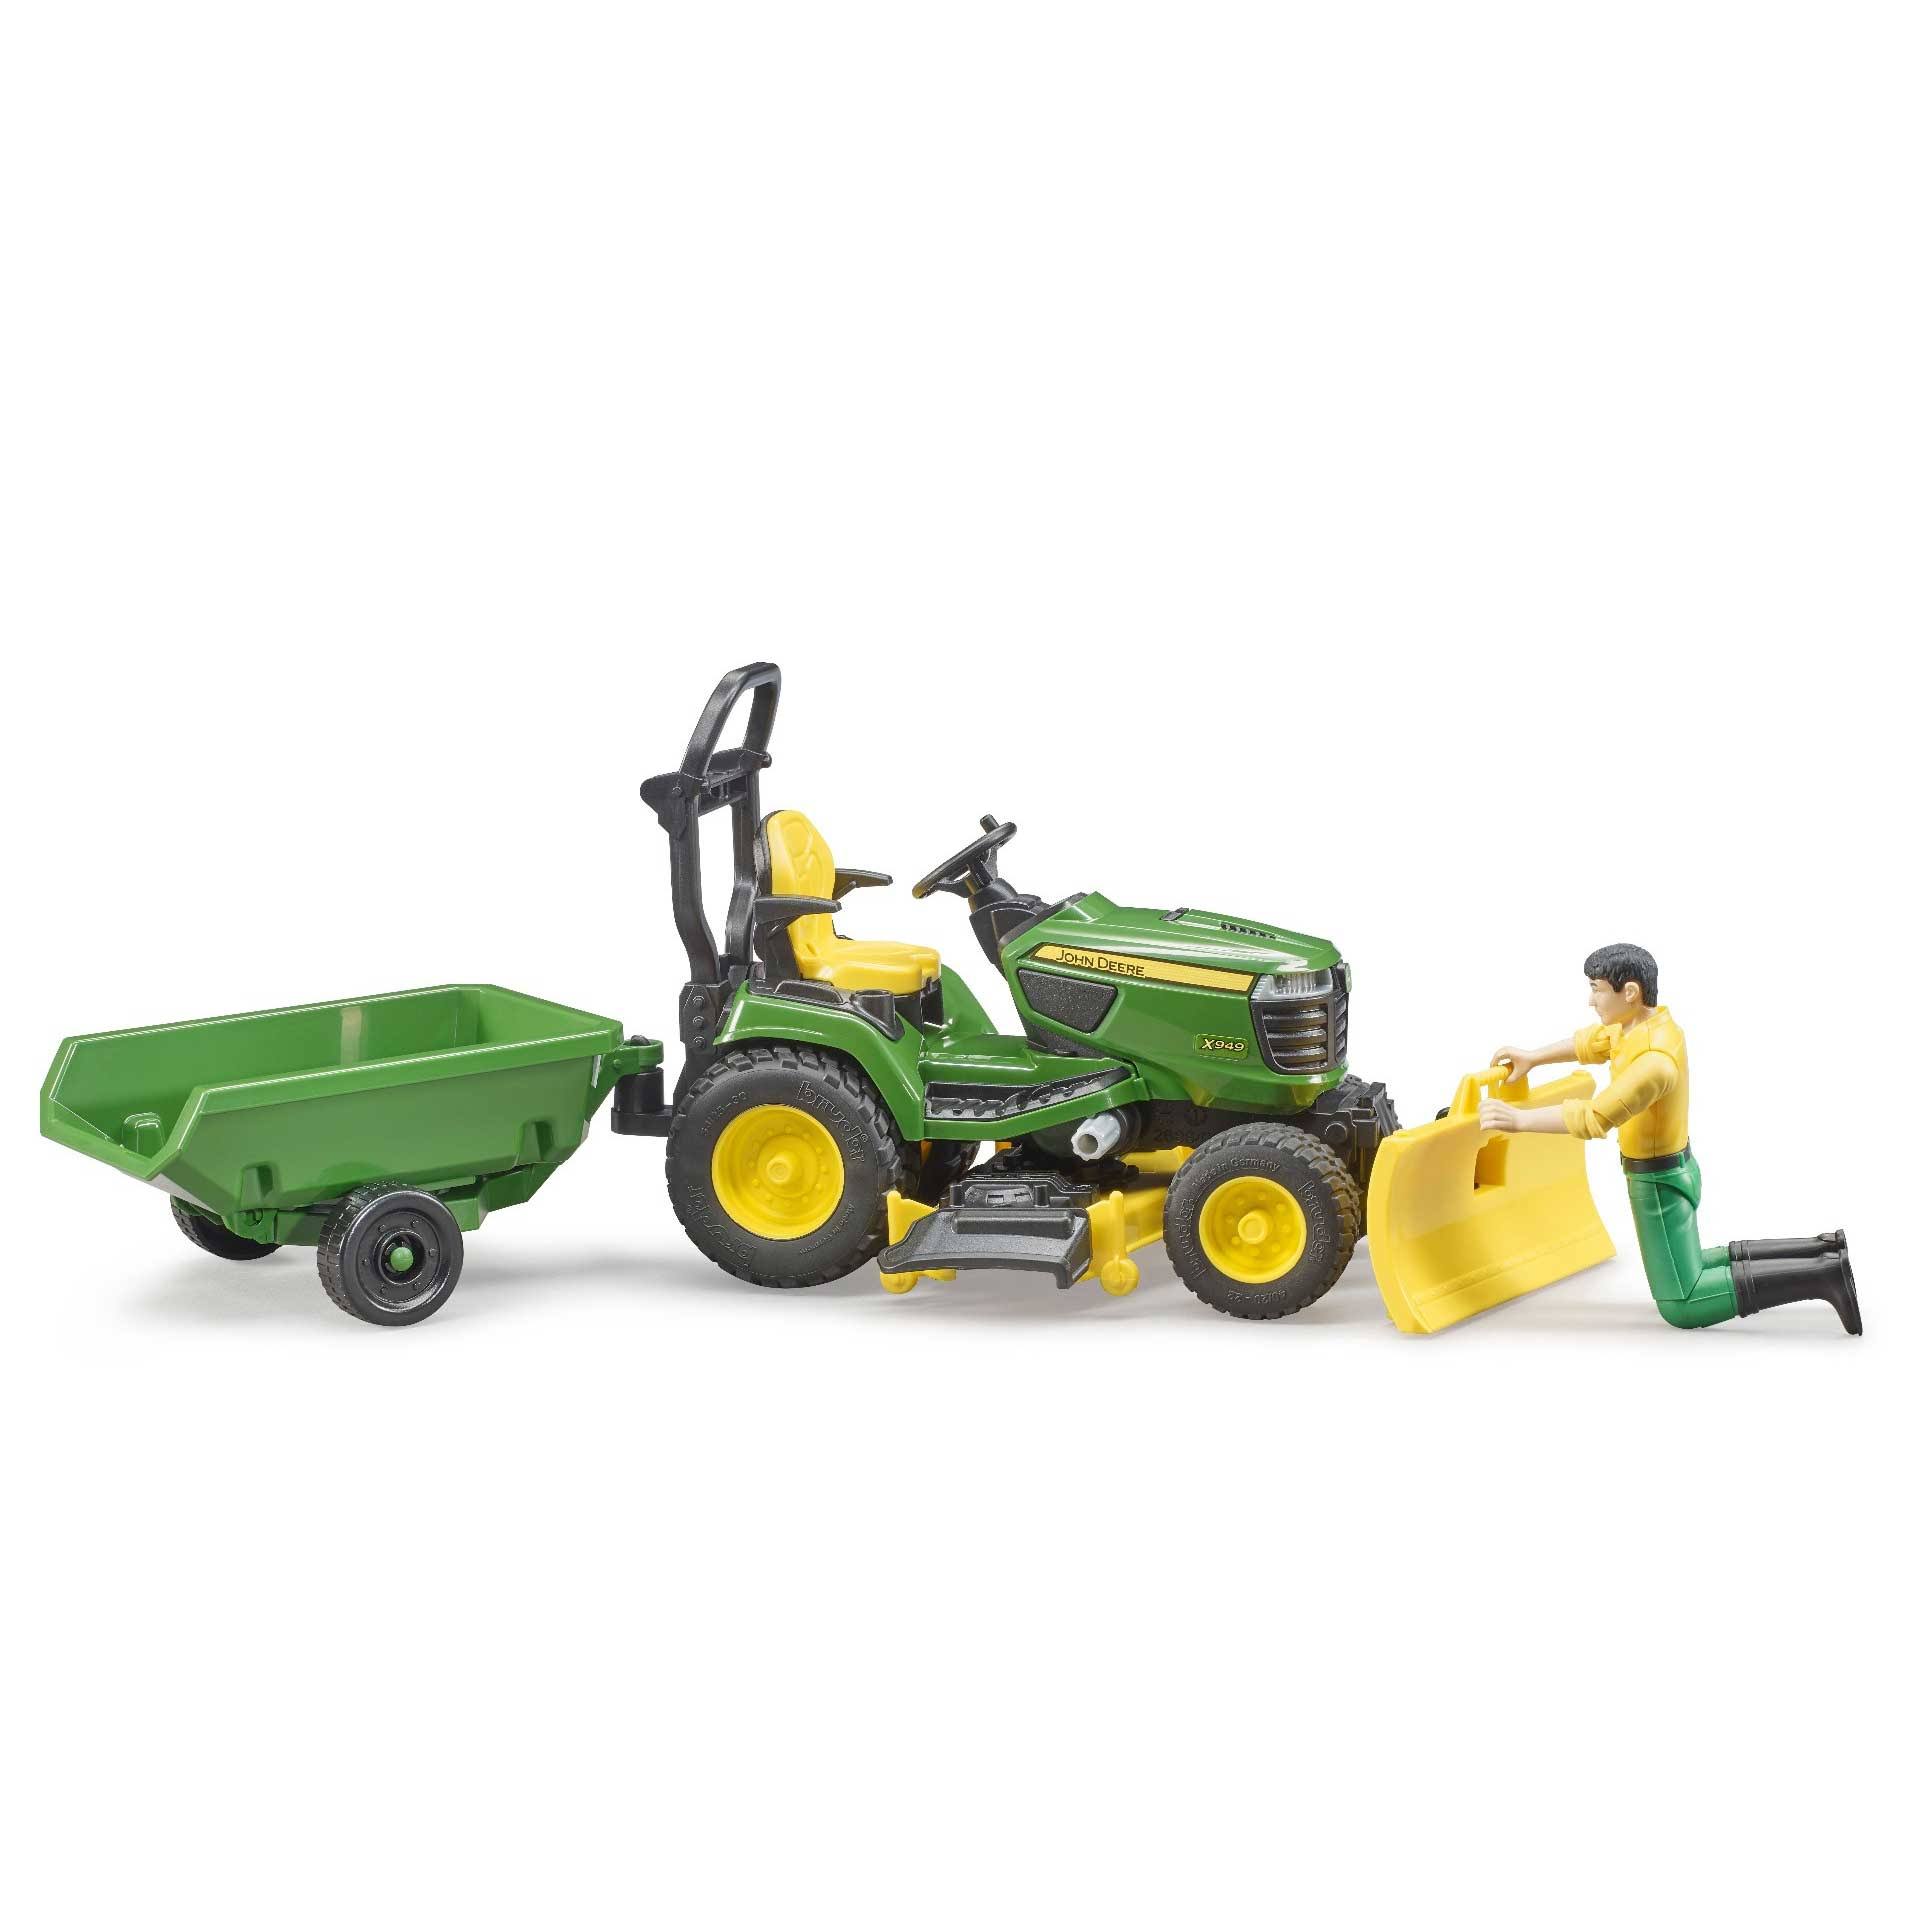 Bruder Bworld John Deere Lawn Tractor with Trailer and Figure